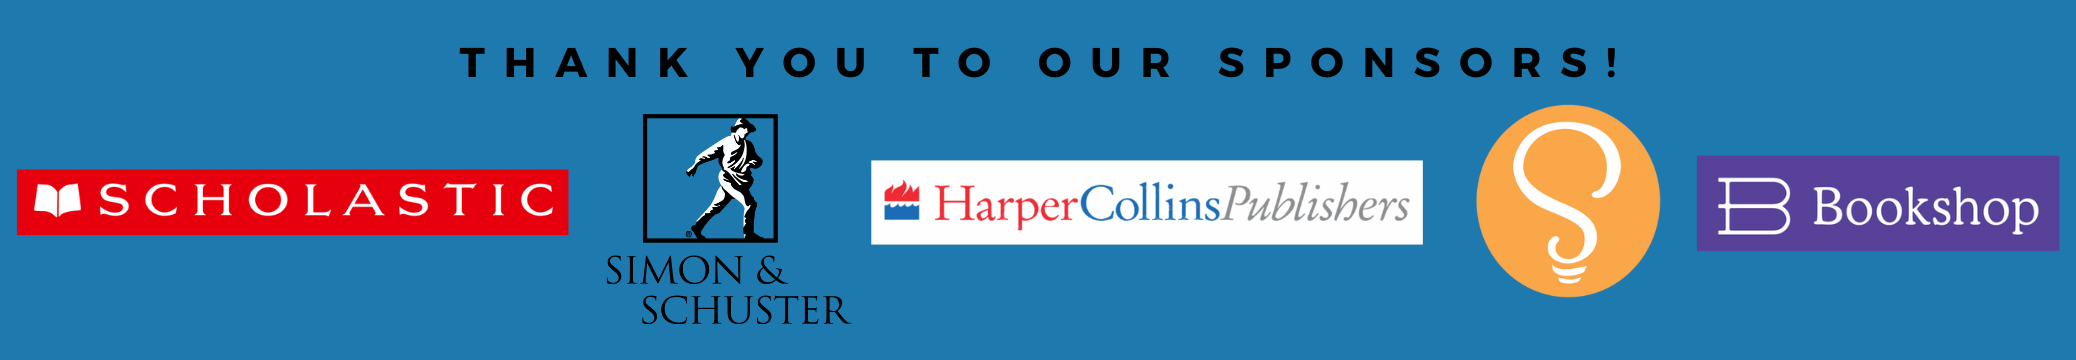 Thank you to our sponsors! Logos for Scholastic, HarperCollins, Sourcebooks and Bookshop.org